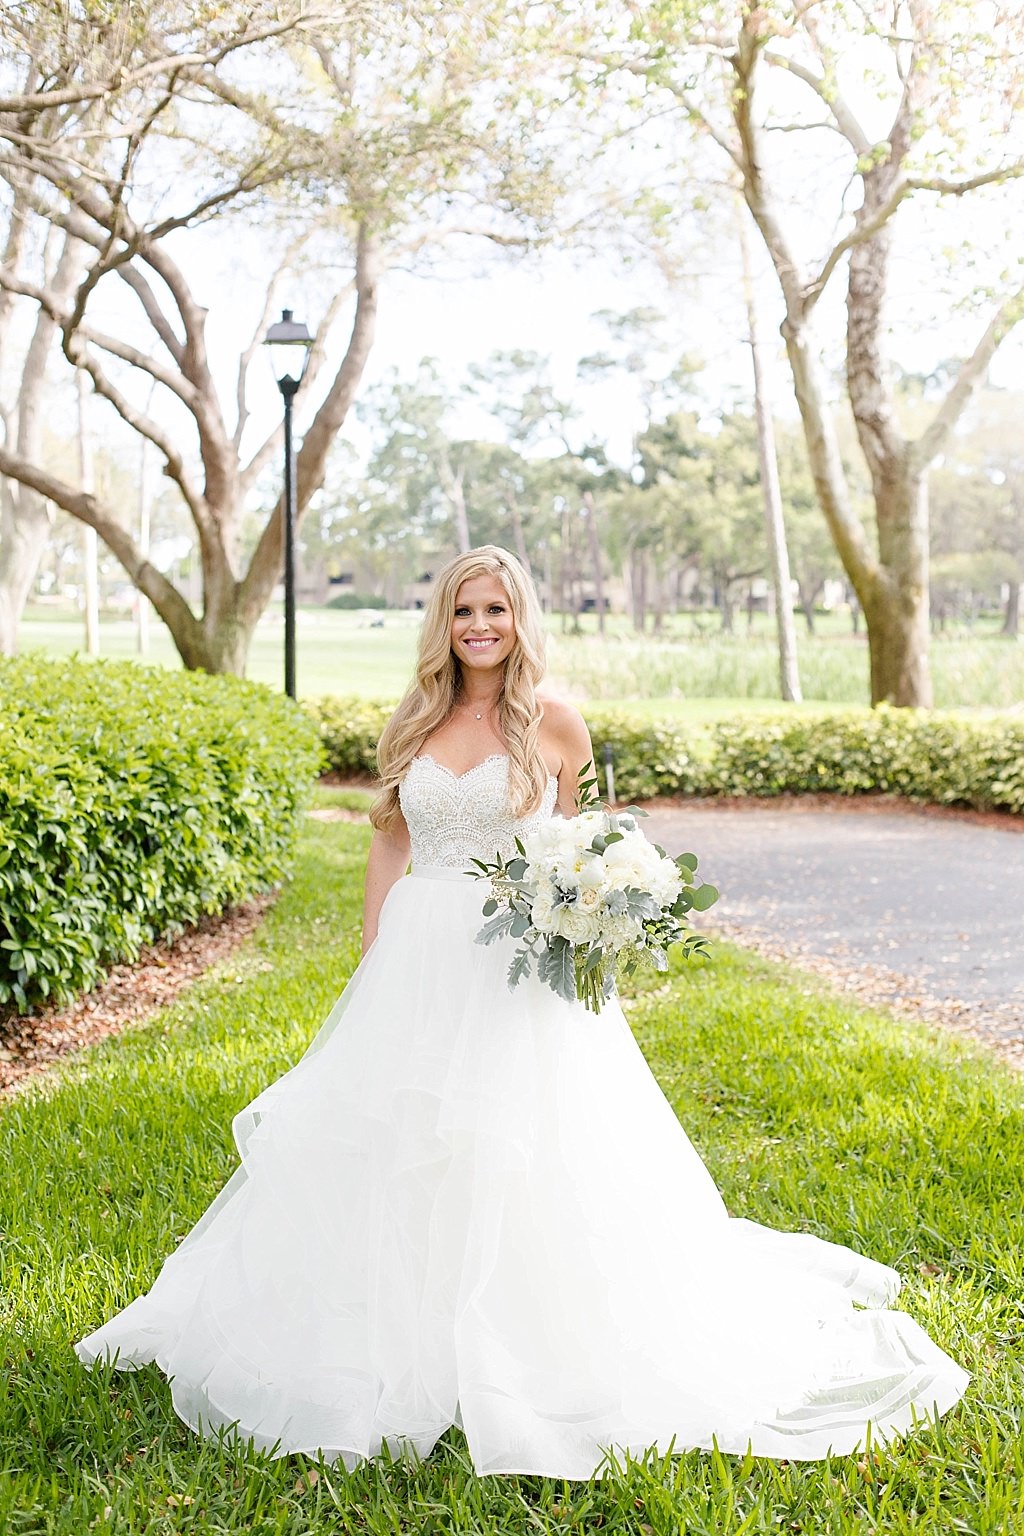 Florida Beauty Bridal Wedding Portrait in Wtoo Watters Lace Sweetheart Neckline Strapless Bodice, Tulle Ballgown Skirt Wedding Dress, Ivory, White, Dusty Miller and Greenery Floral Bouquet | Tampa Bay Wedding Hair and Makeup Artist Femme Akoi Beauty Studio